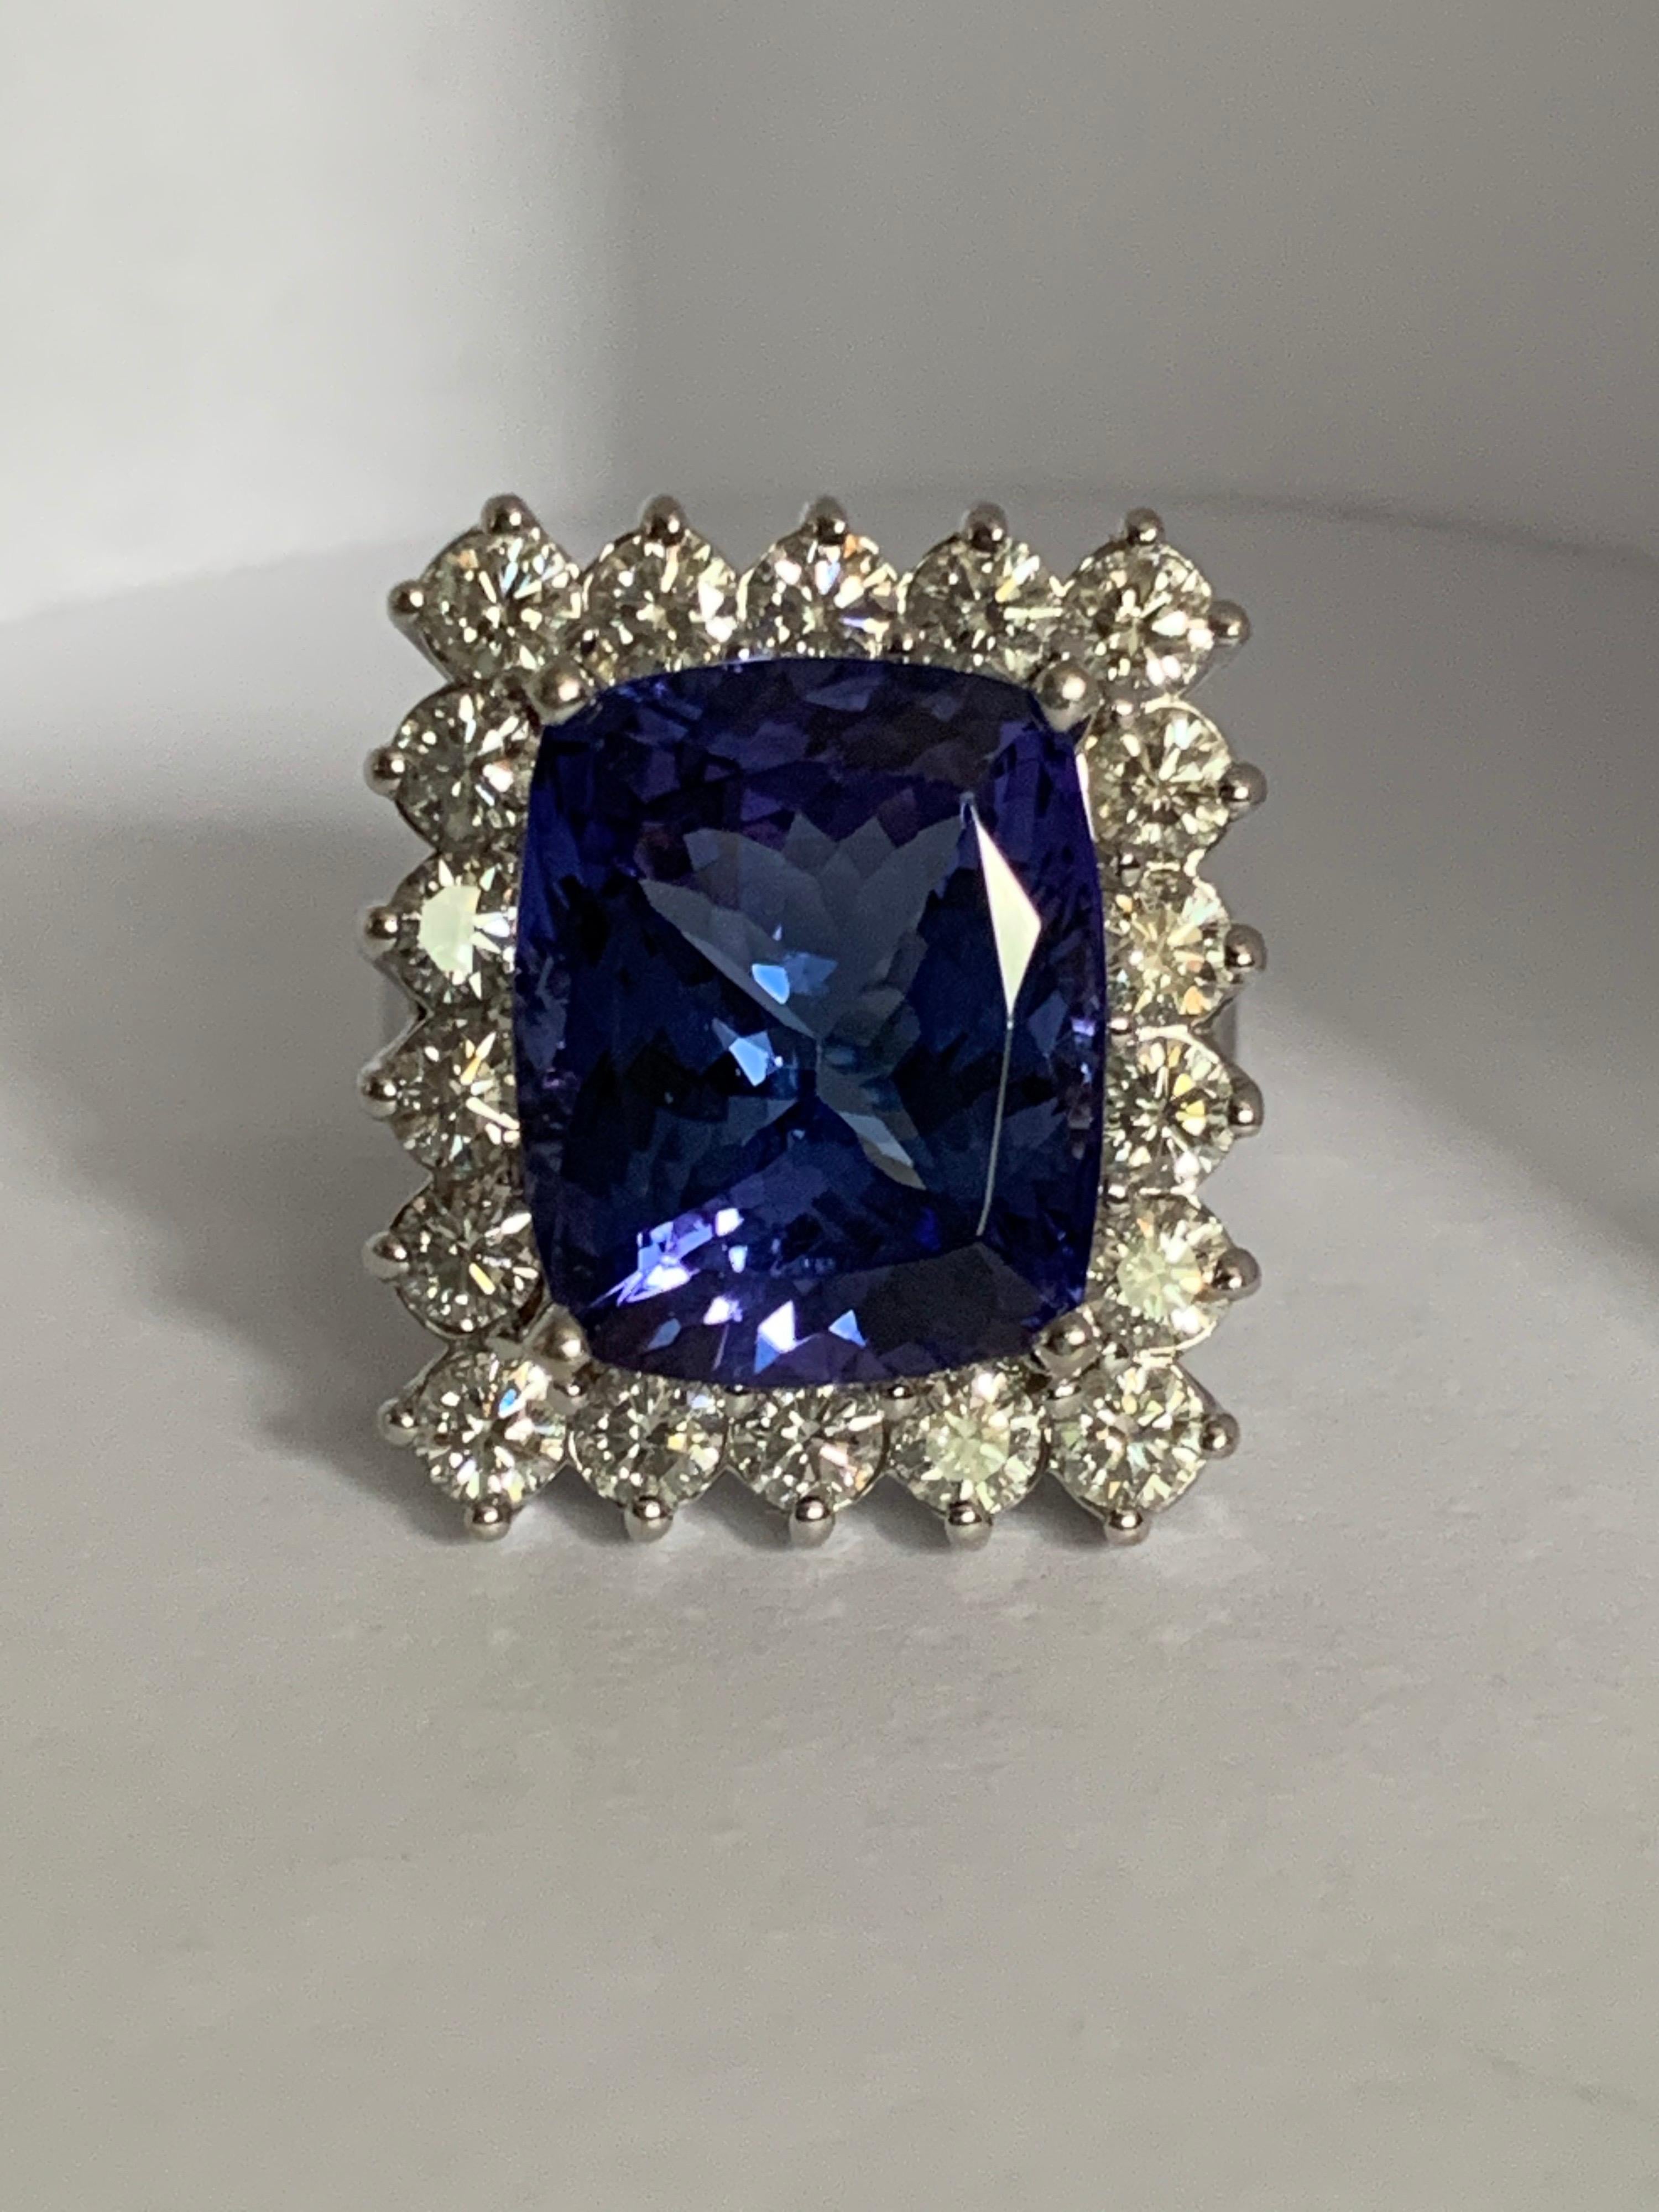 Cushion Cut AAA 10.35 Carat Tanzanite and Diamond Cocktail Ring For Sale